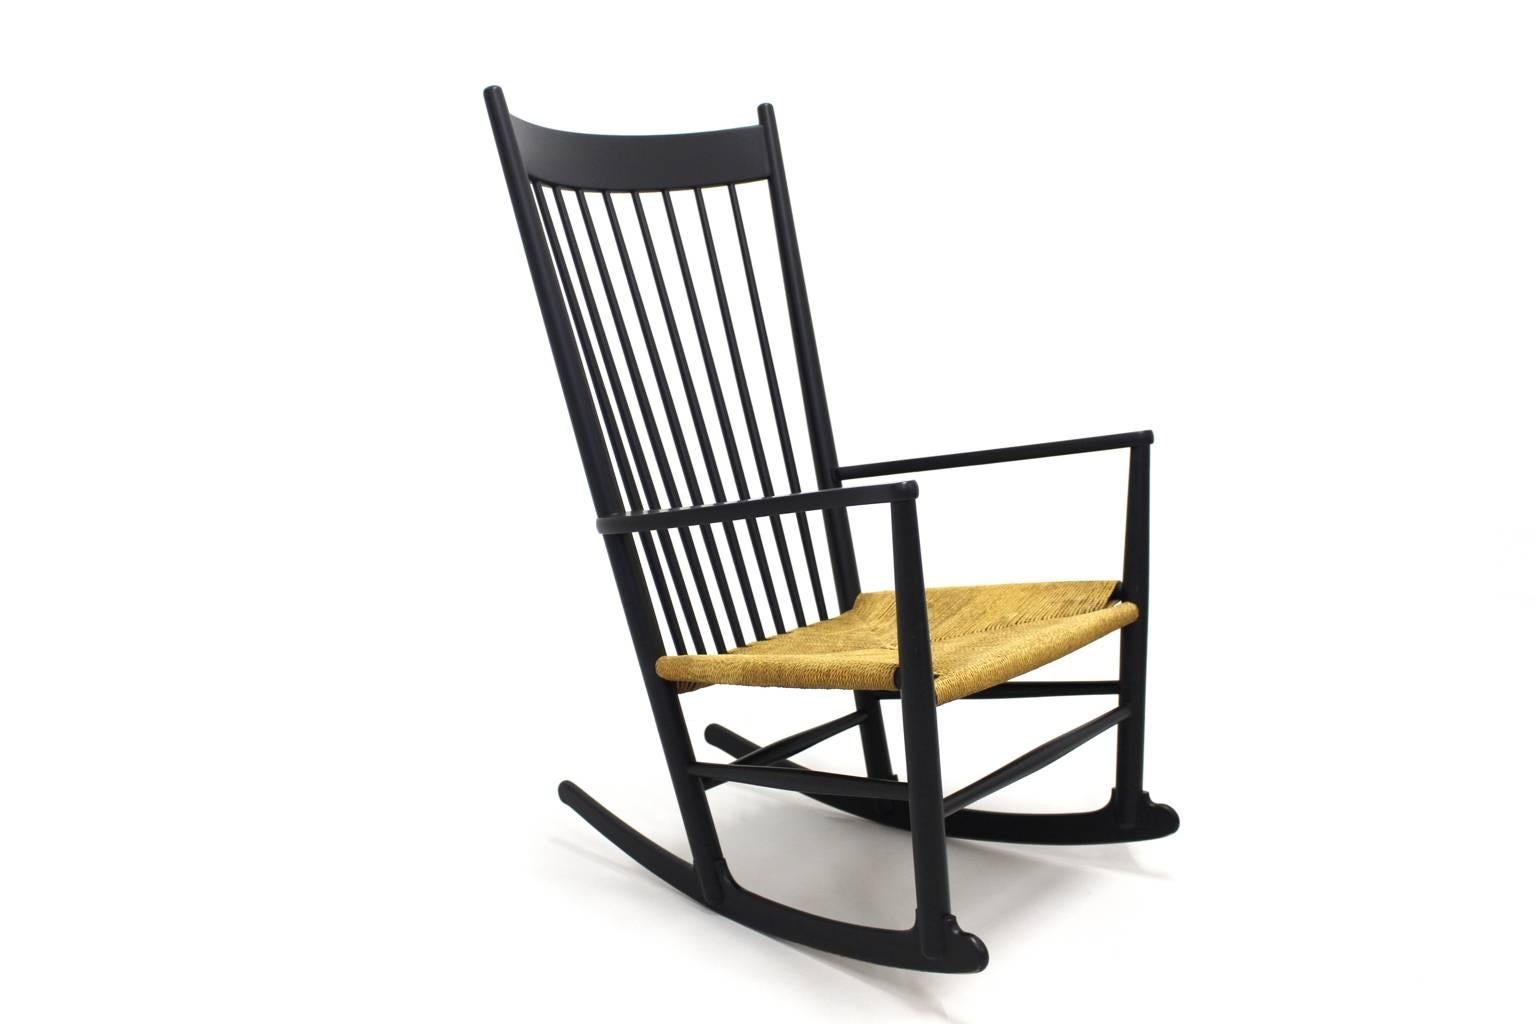 The rocking chair J 16 was designed by Hans Wegner 1944 and manufactured by Mobler F.D.B. Denmark 1964 marked.

The seat frame is made of black lacquered beechwood and the seat is made of string mesh.

The condition is very good with minor signs of